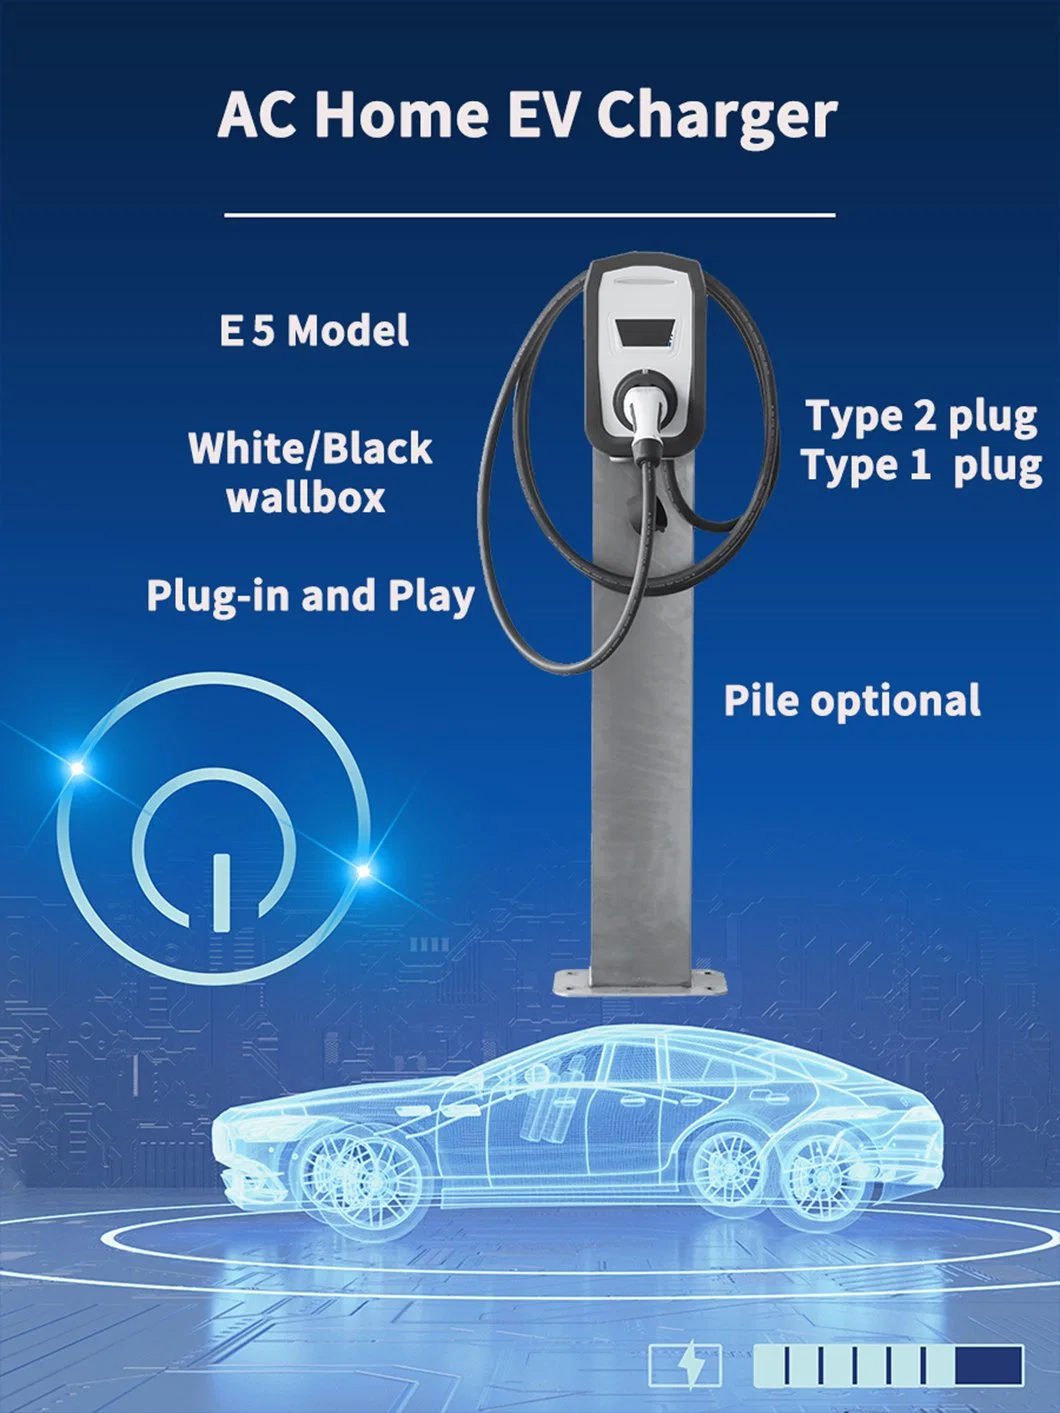 Wall Box Type Socket Type 2 32A 7.4kw Single Phase EV Charging Infrastructure EV Charger for Electricvehicles